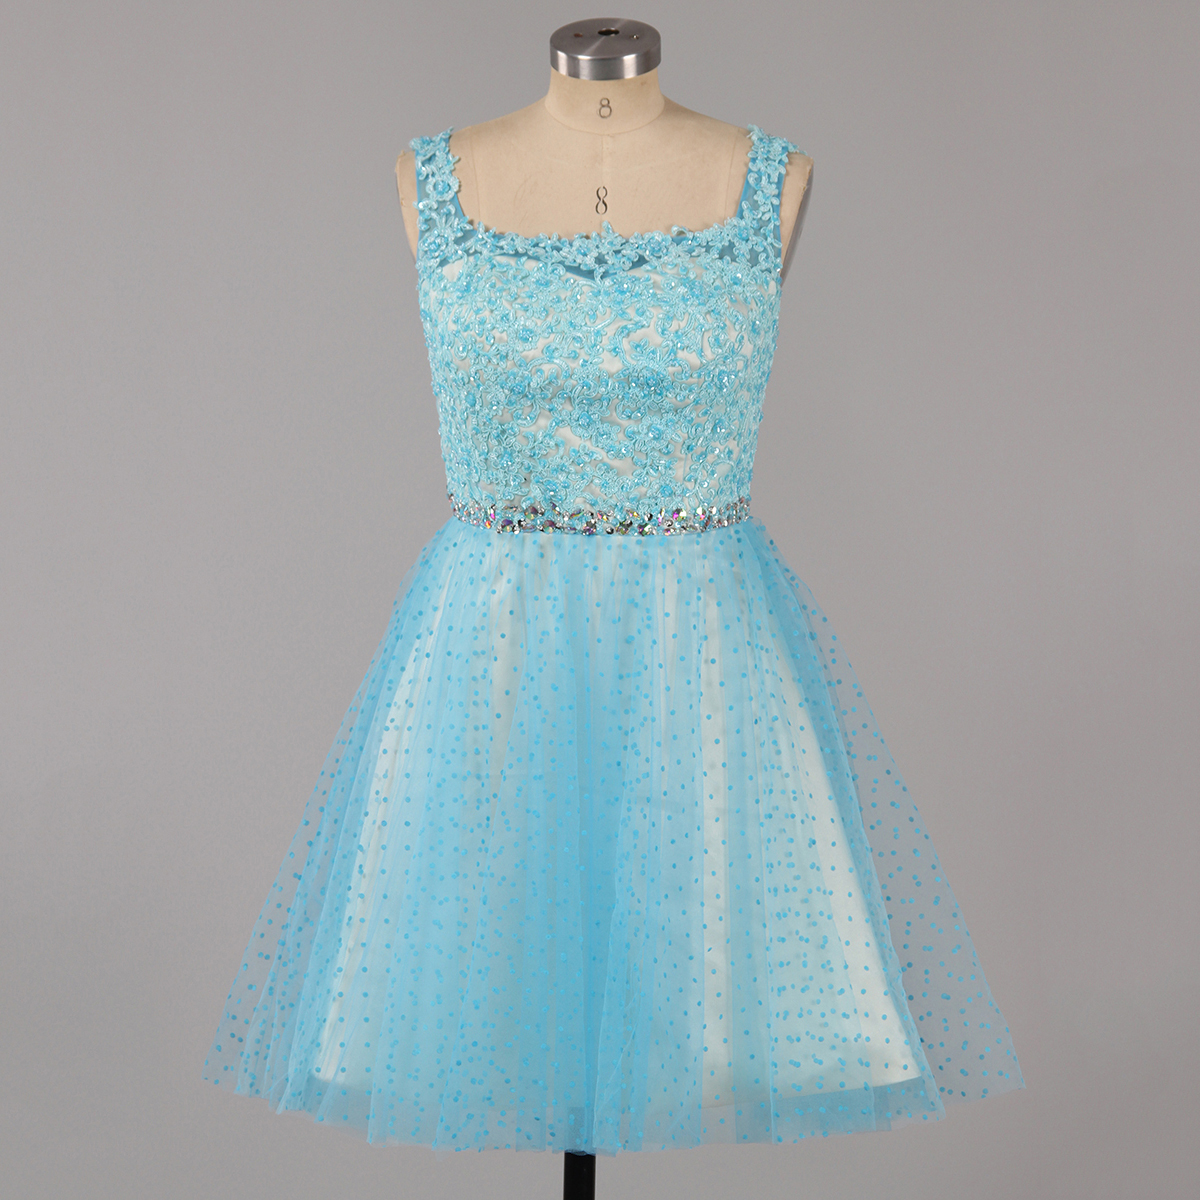 Ice Blue Square Neck Homecoming Dress with Beaded Belt, Low Back Homecoming Dress, Tulle Mini Homecoming Dress with Lace Appliques